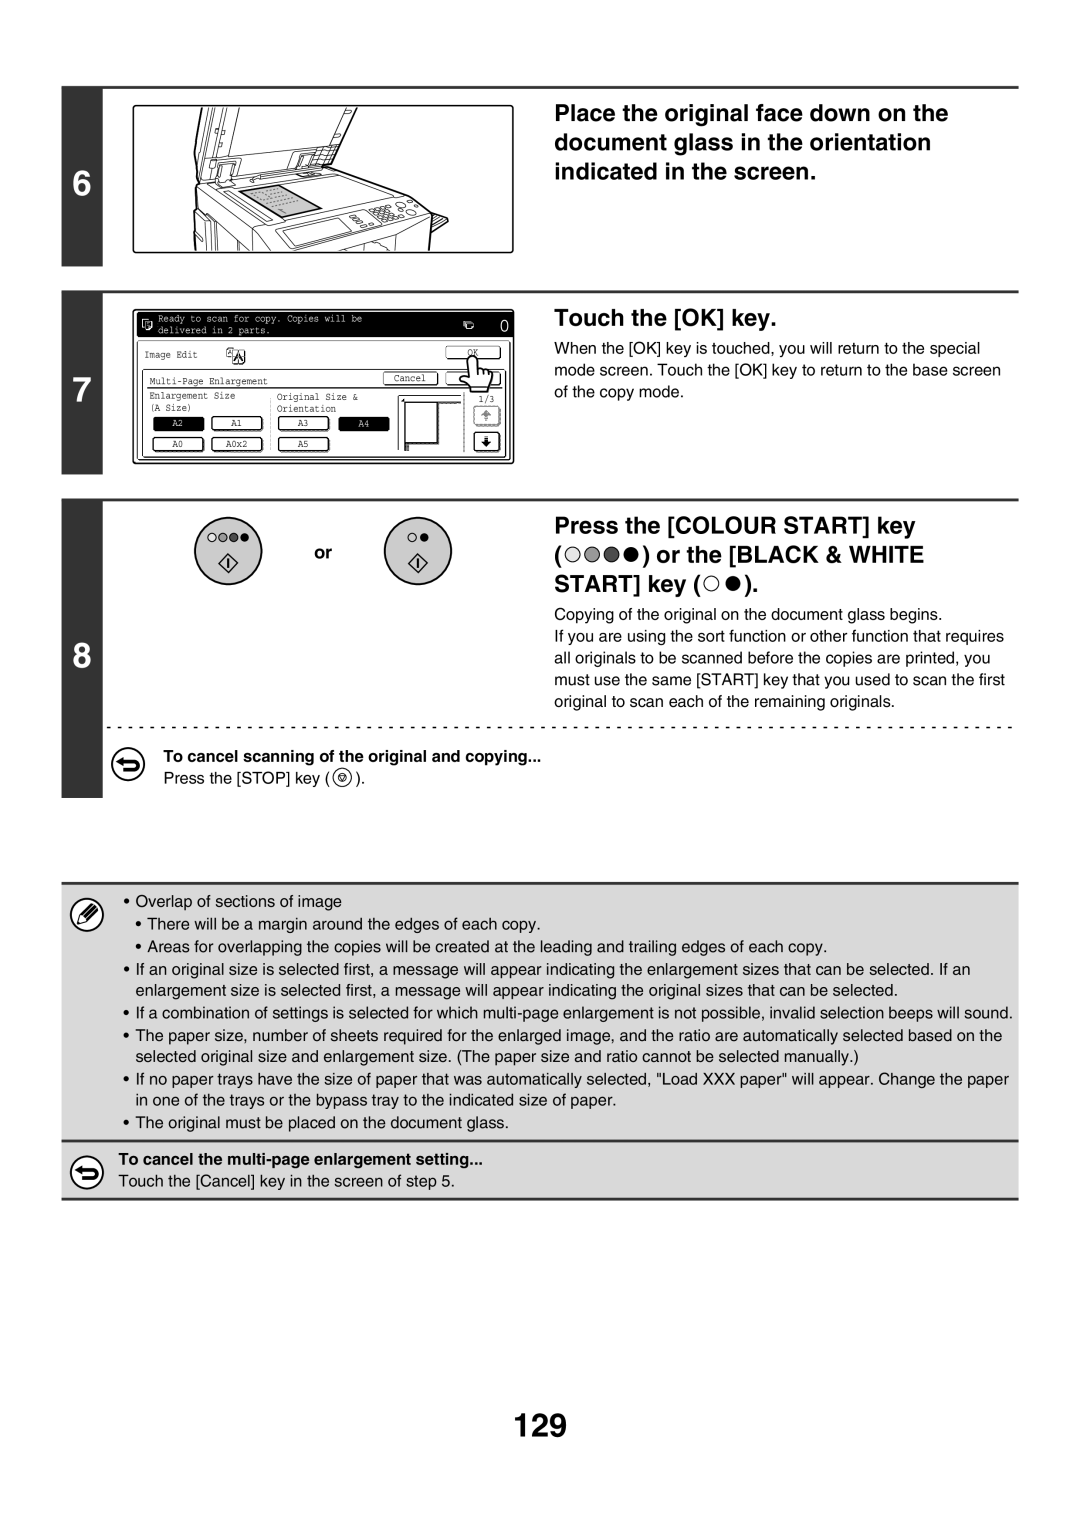 Sharp MX-2300G document glass in the orientation, indicated in the screen, Place the original face down on the, START key 